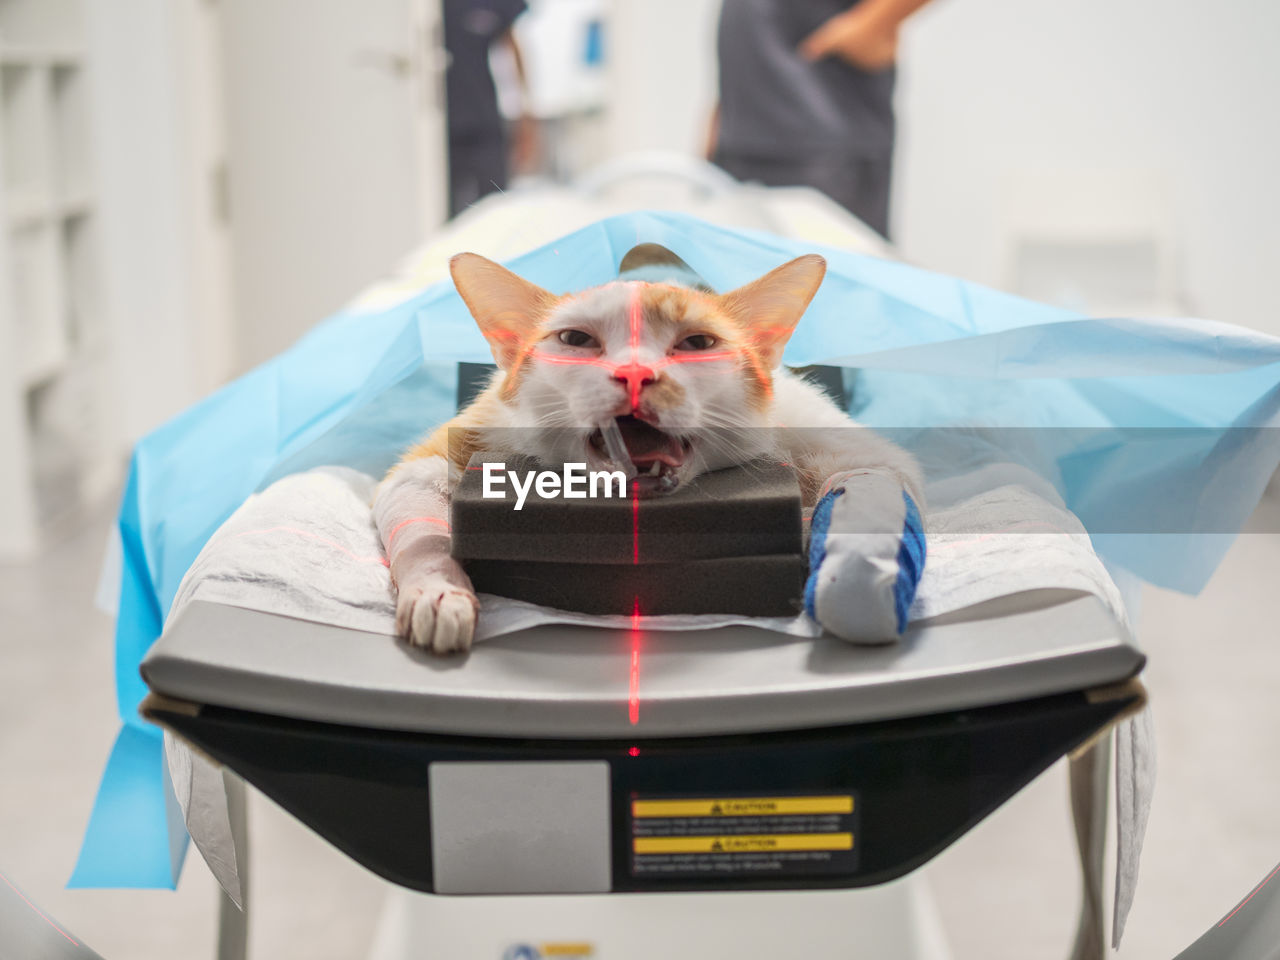 Cat with injured paw lying on table scanning in mri equipment in veterinary clinic